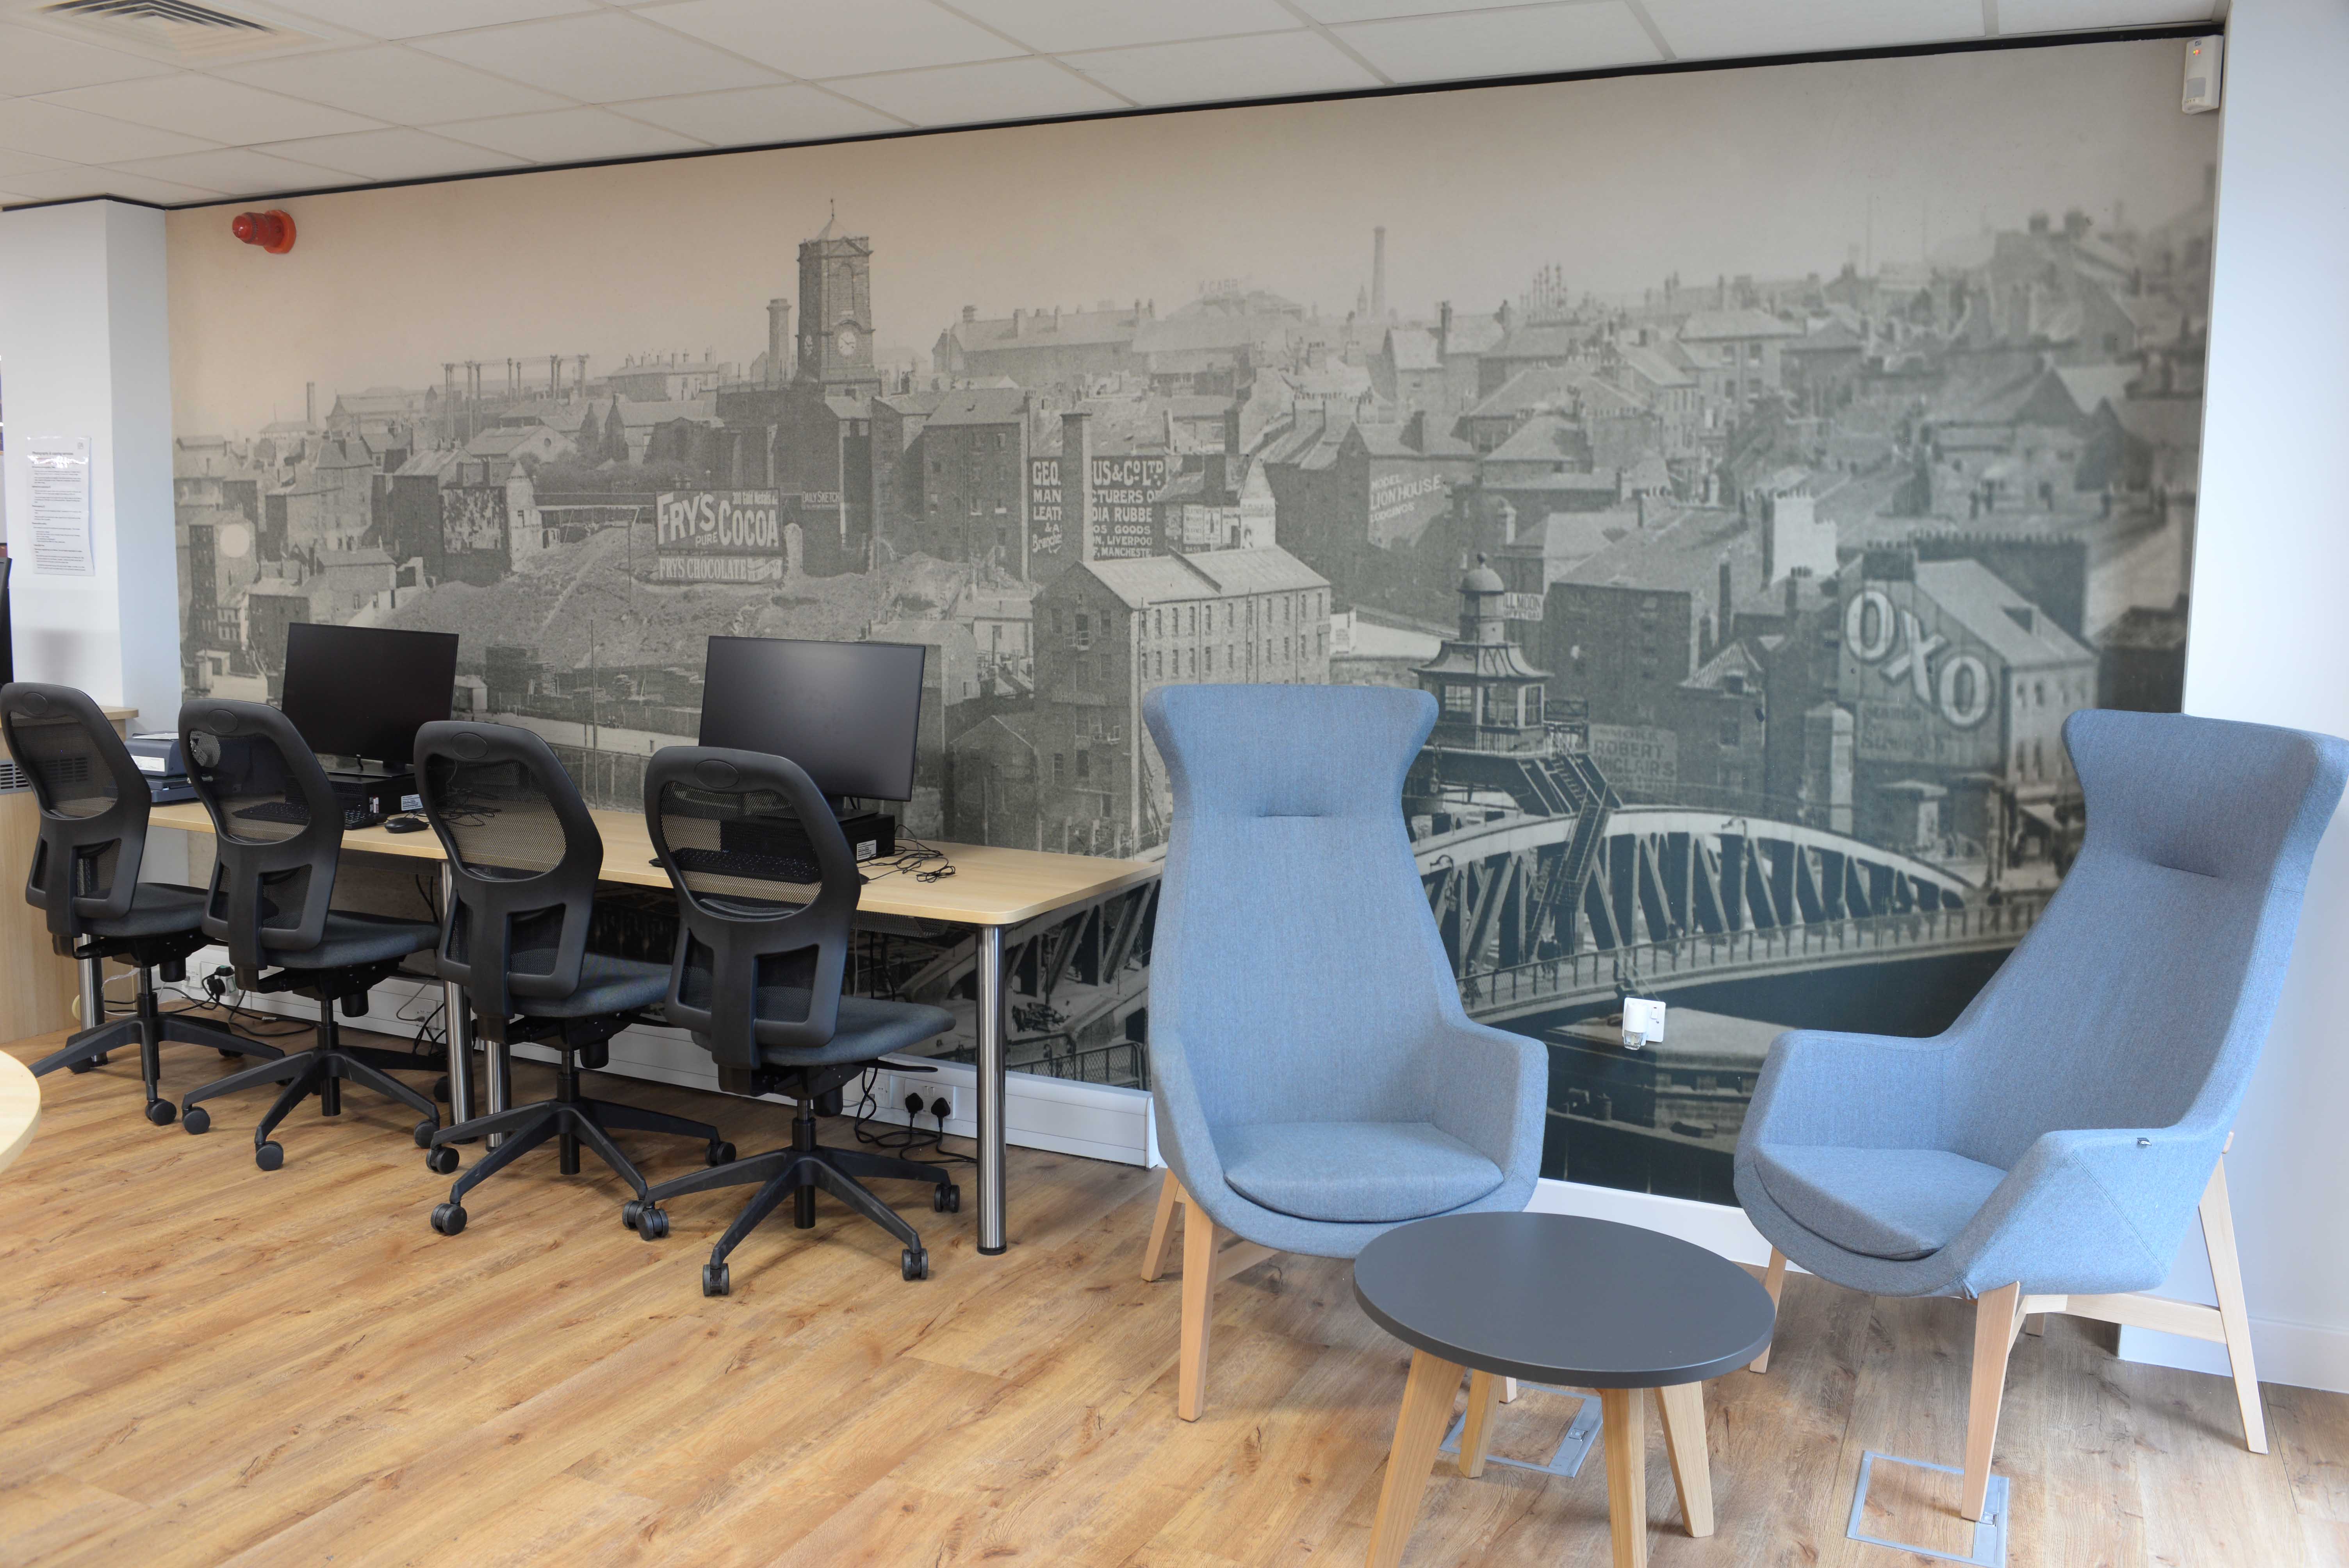 Early archive photo of Gateshead used as wall graphic behind PC desks and seating area